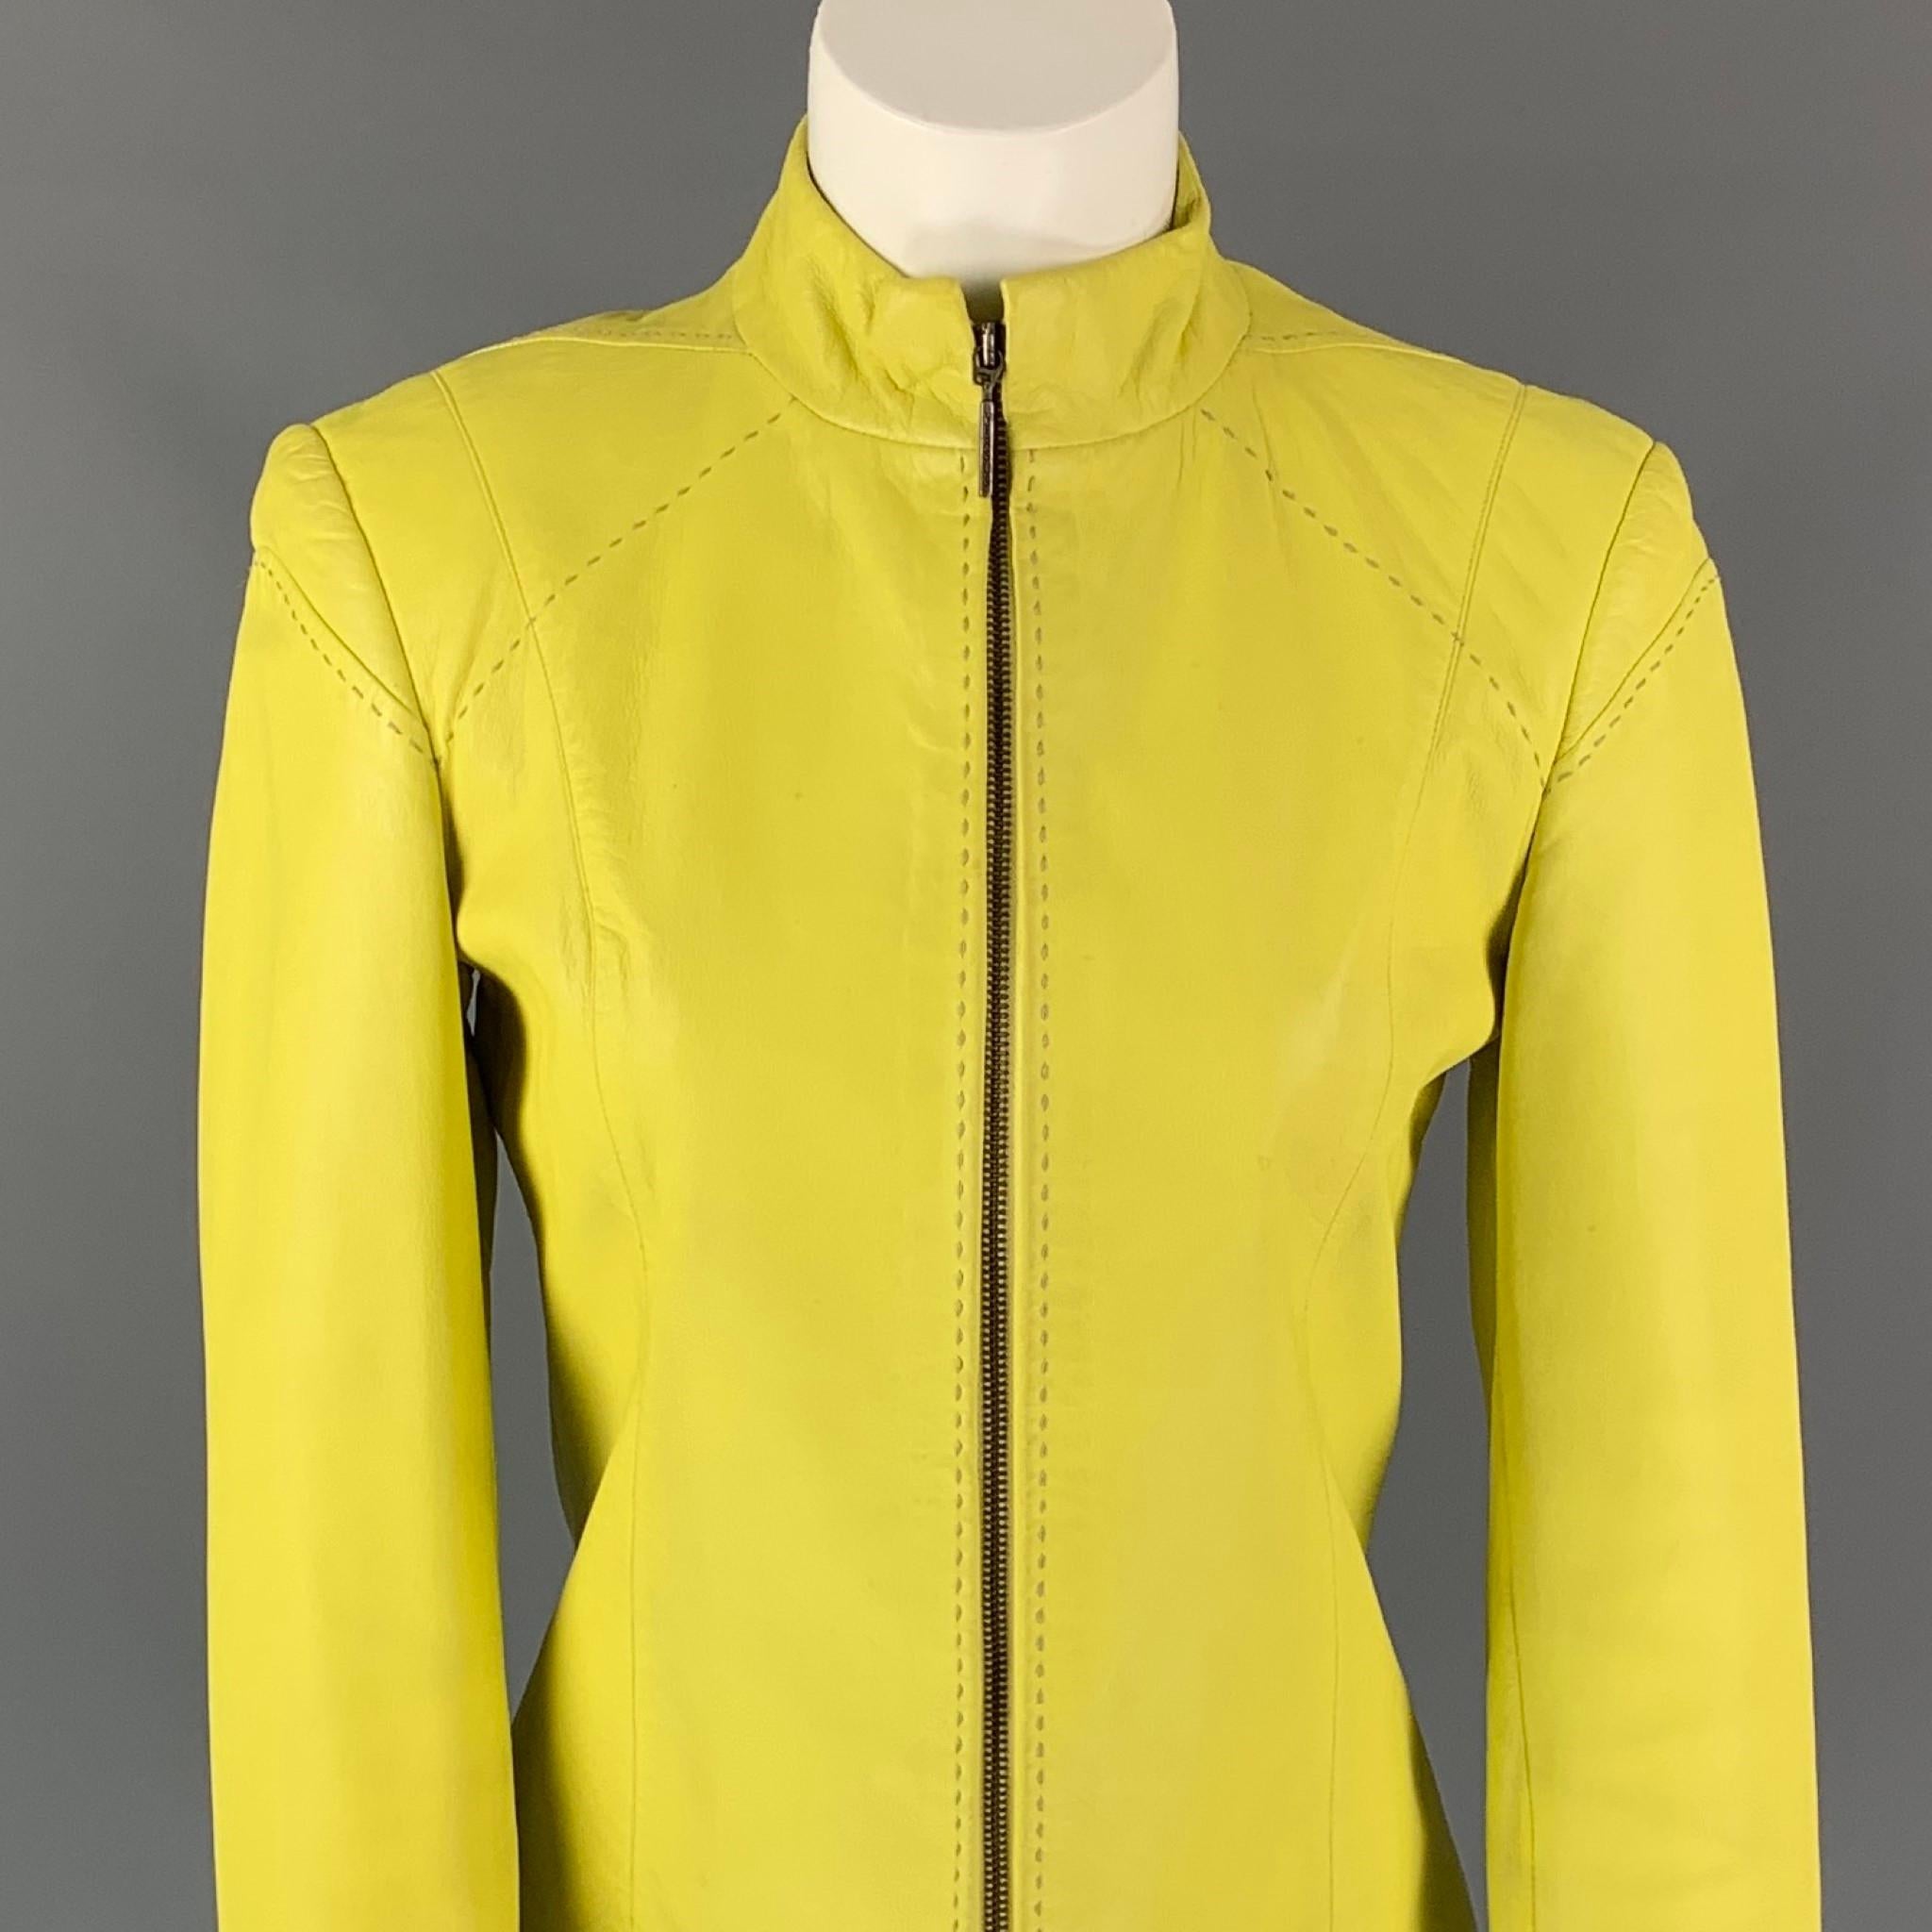 Vintage VERSUS by GIANNI VERSACE jacket comes in a yellow leather featuring a stand up collar, top stitching, and a full zip up closure. Made in Italy.

Good Pre-Owned Condition. Moderate marks at back.
Marked: 26/40

Measurements:

Shoulder: 16